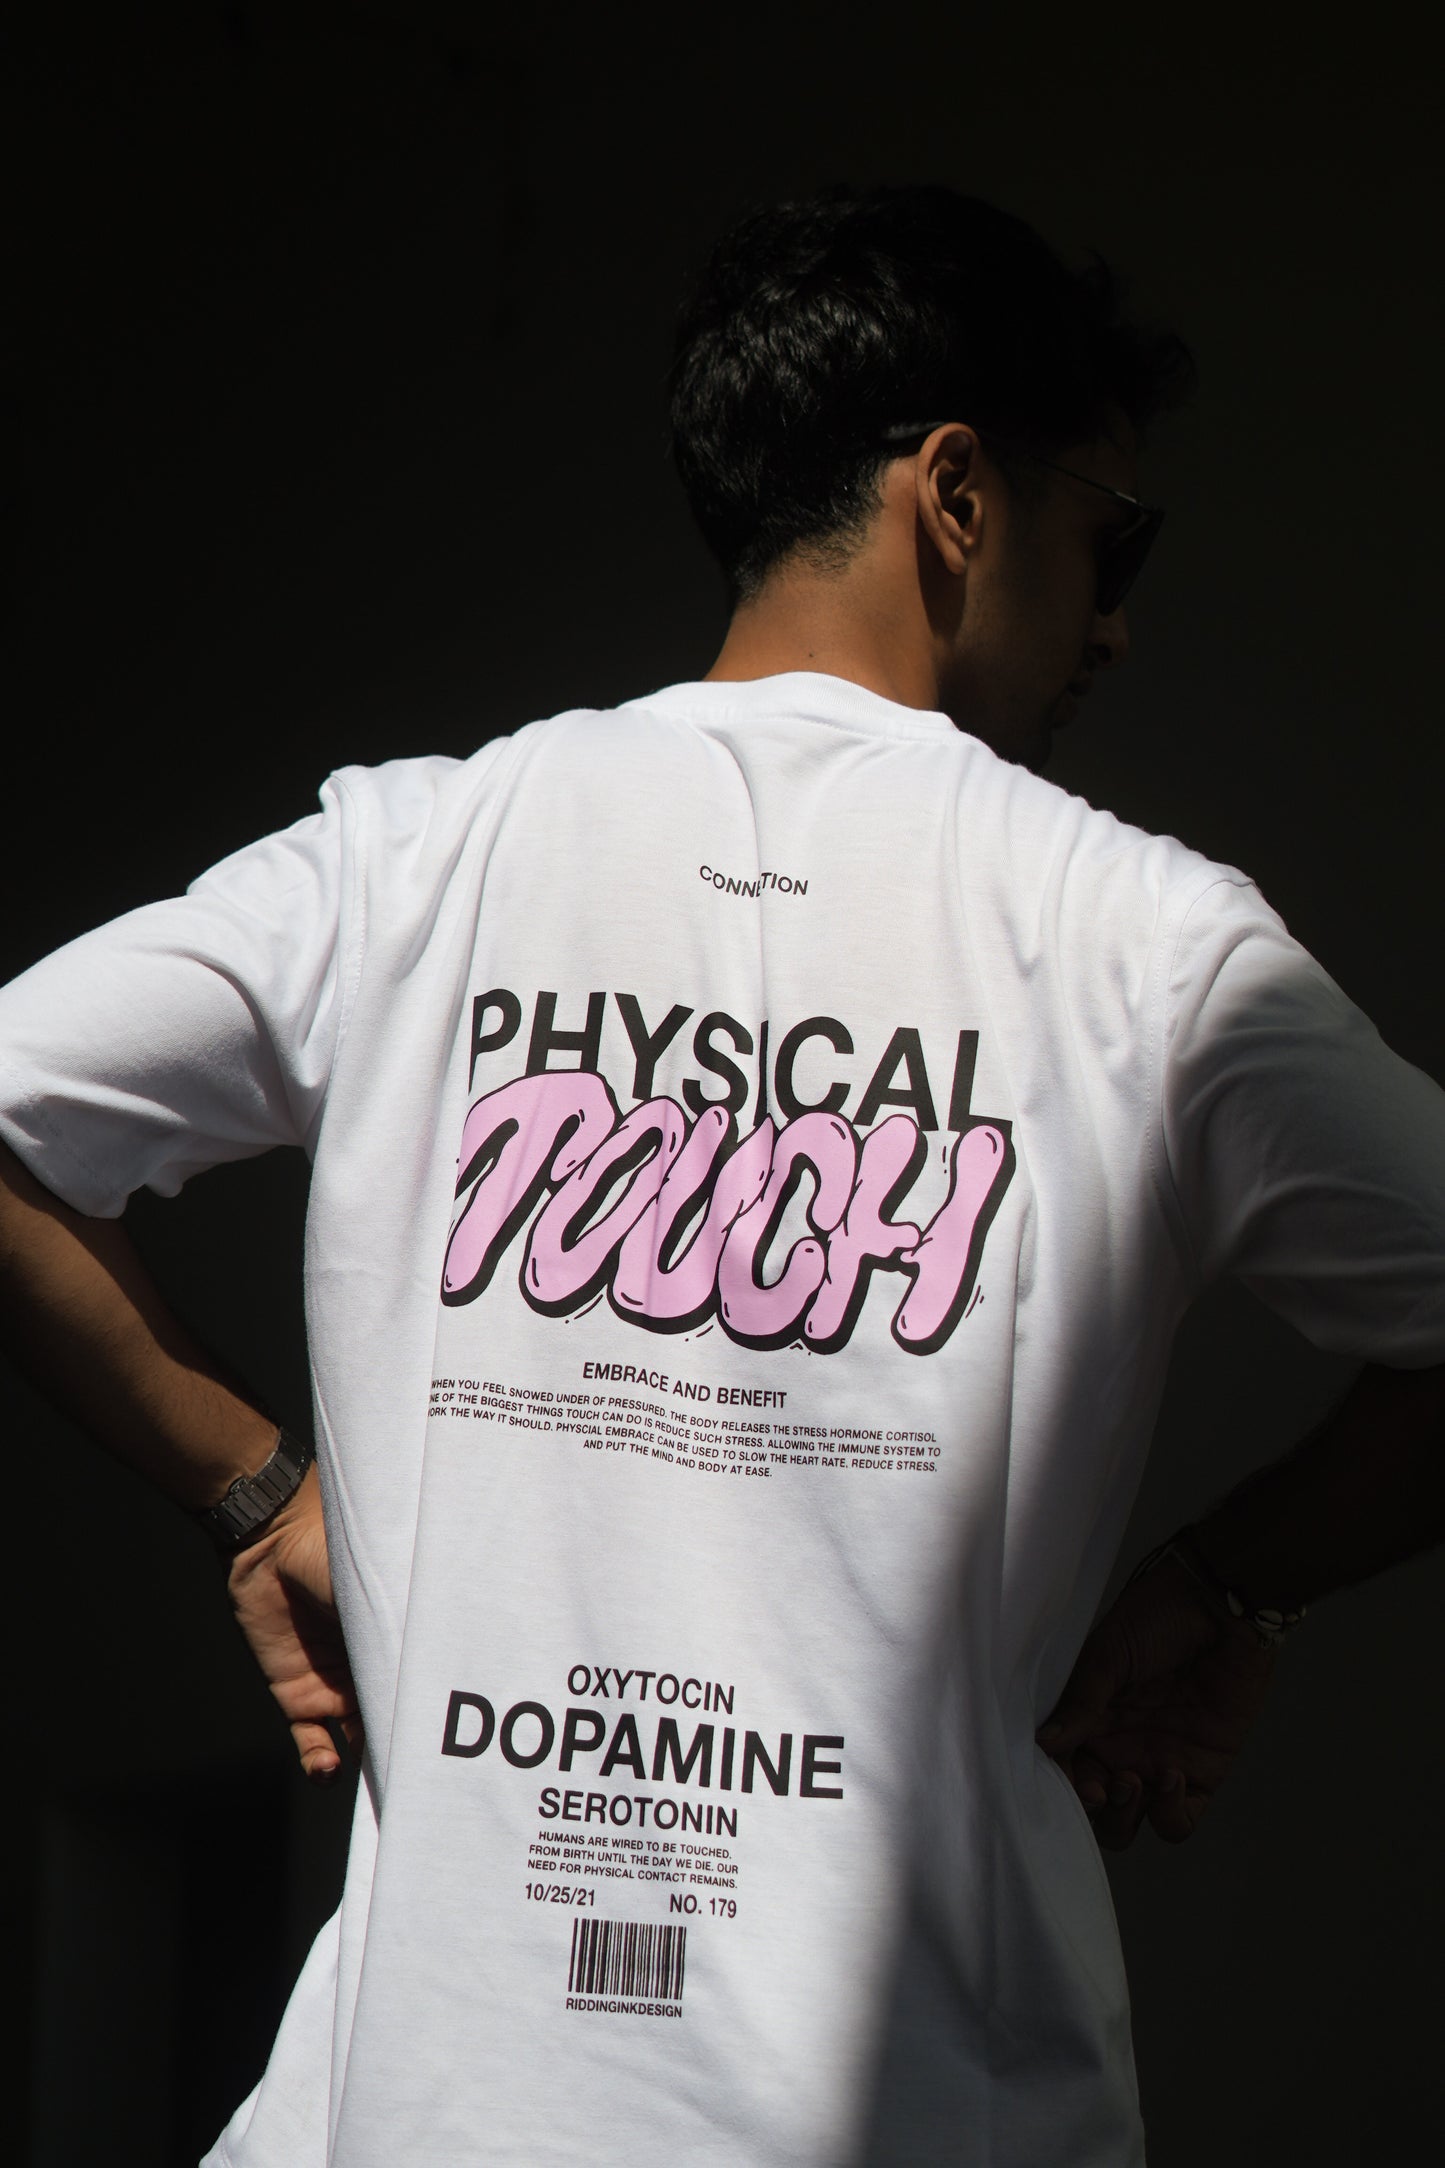 The Physical Touch Tee- USE CODE "BANK15" TO GET  15% OFF